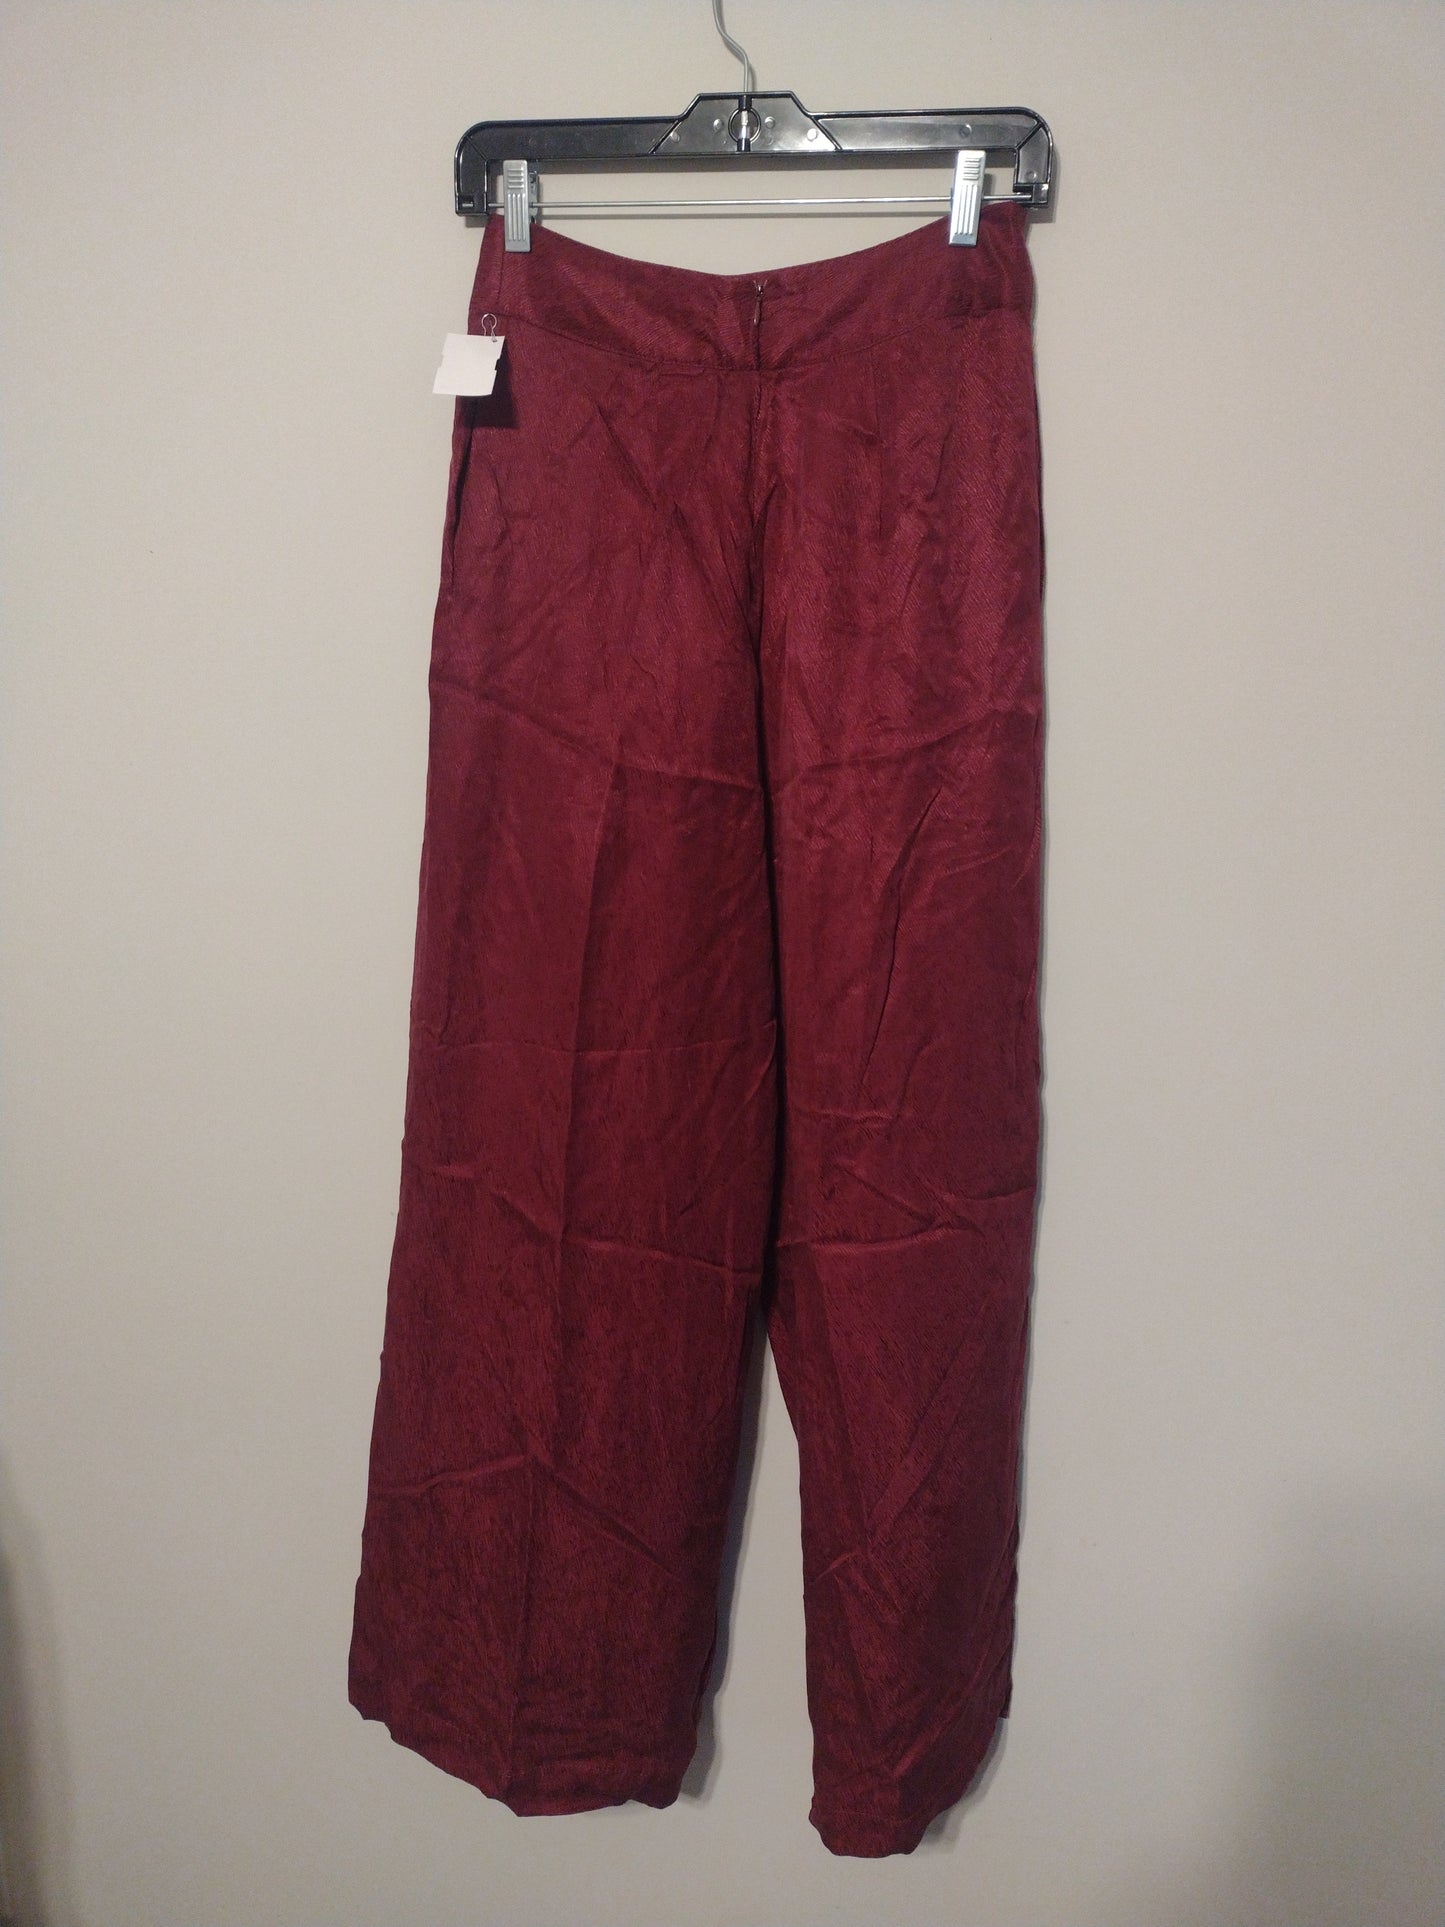 Pants Ankle By Clothes Mentor  Size: 4